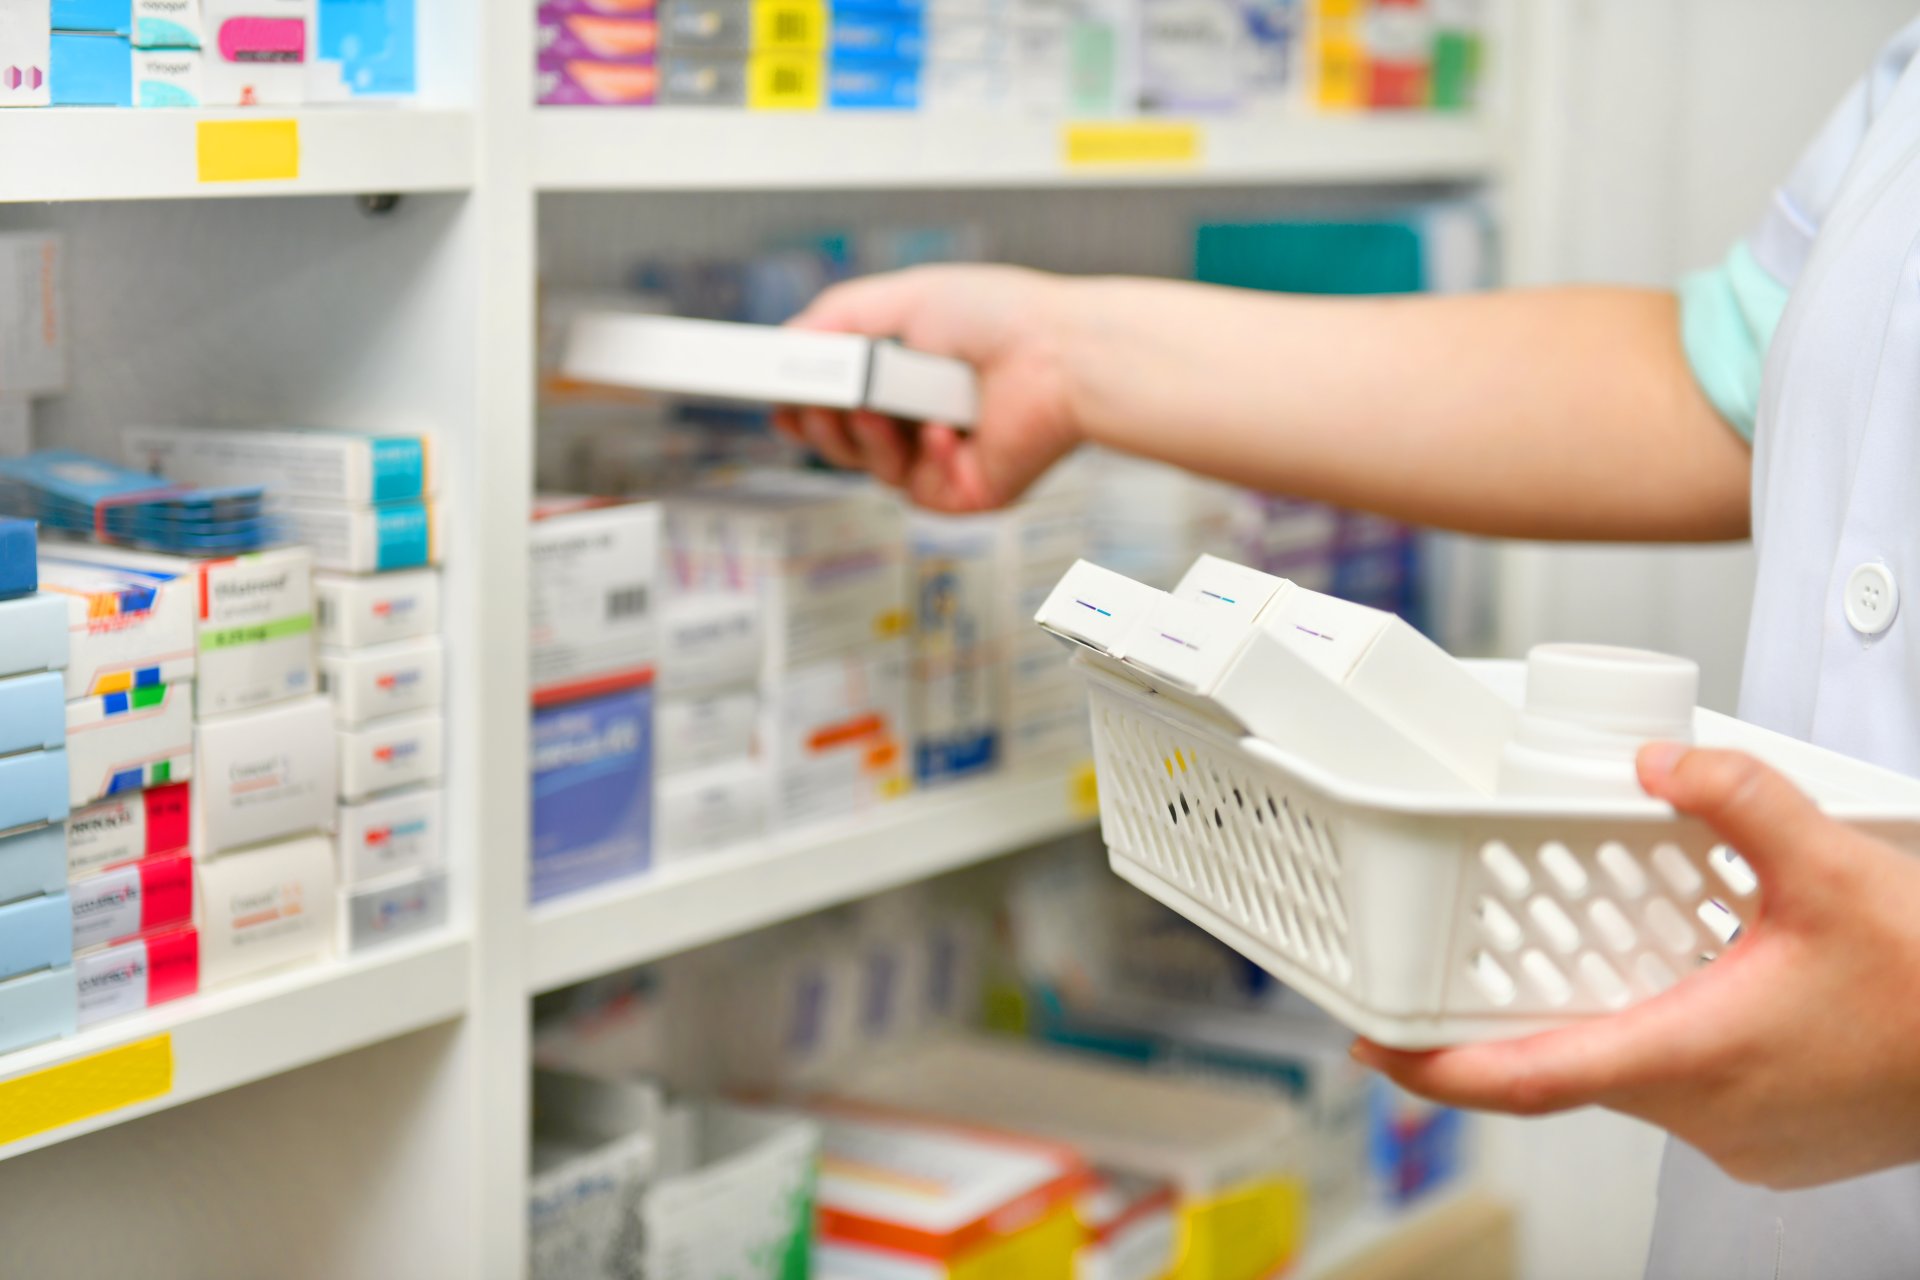 Shelf of pharmaceuticals being stocked by pharmacist 